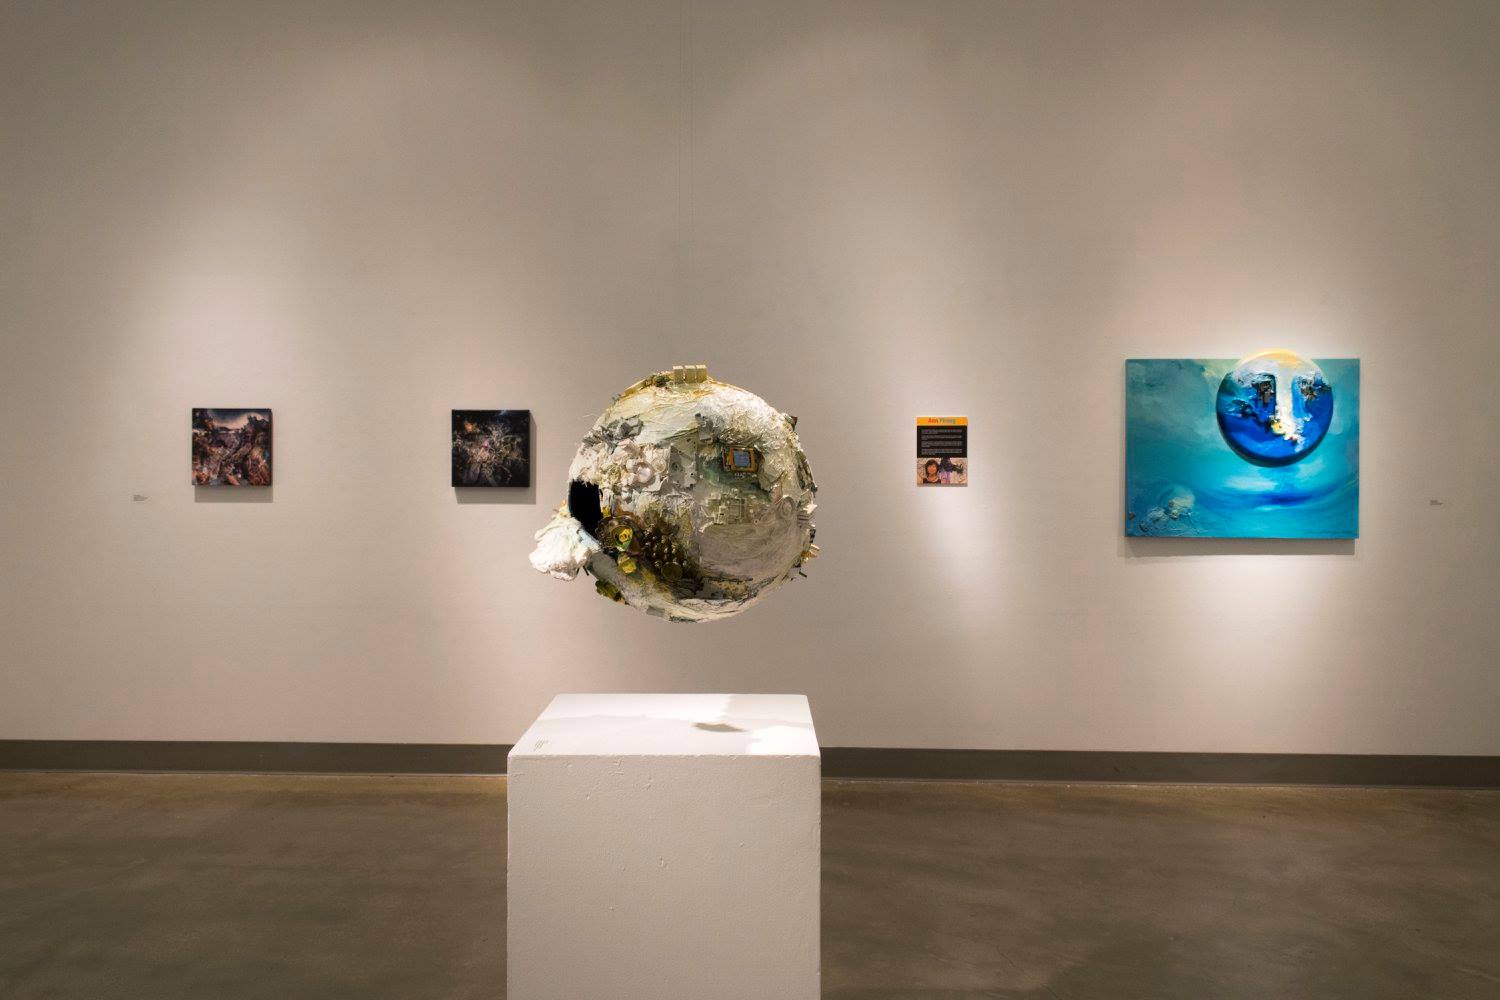 Installation View, Front East Gallery, Art Faculty Show 2016-2017, Dec. 5, 2016 to Feb. 2, 2017